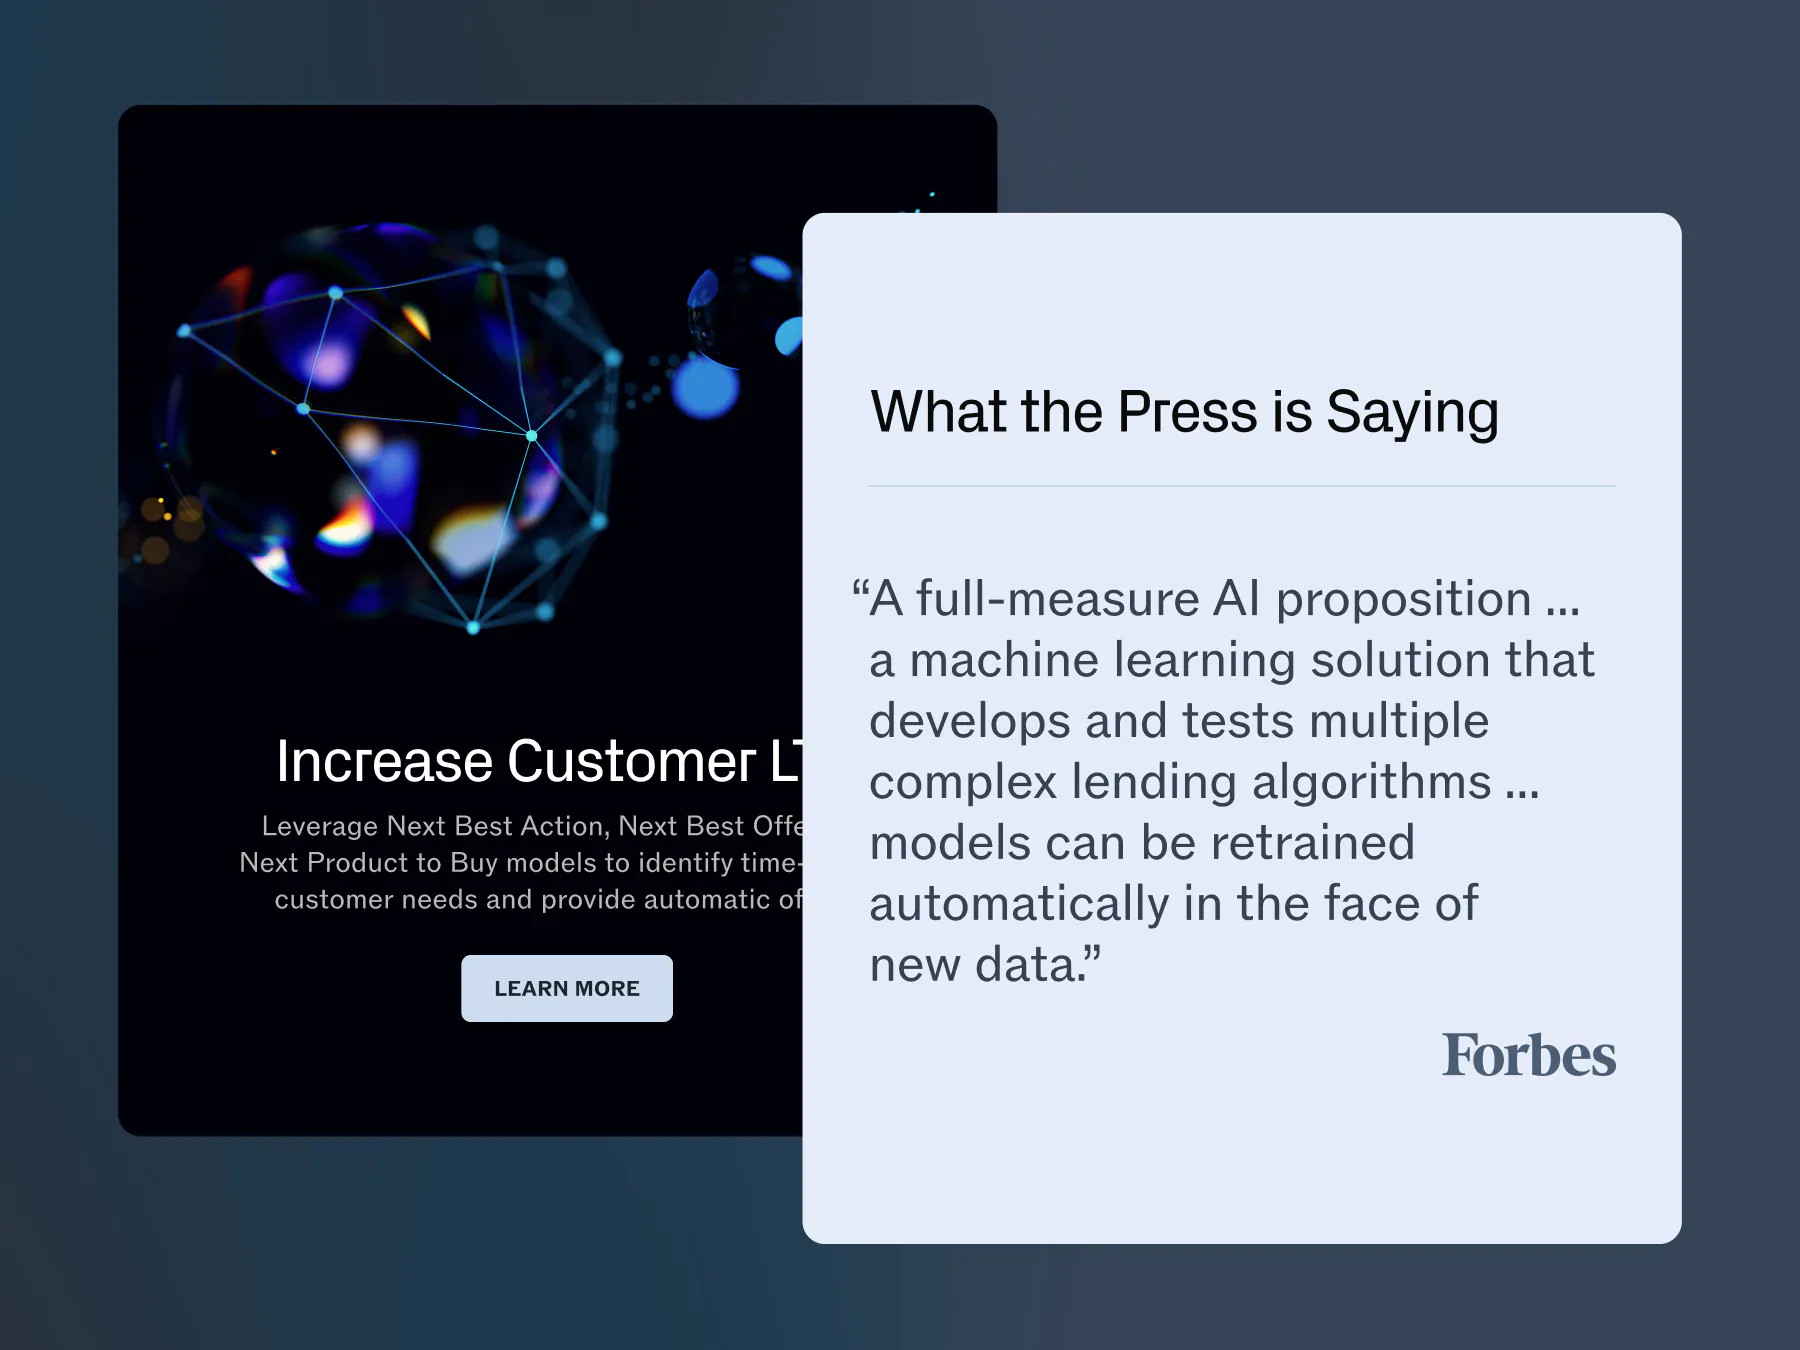 Section design on increasing customer loyalty using AI and a Forbes testimonial highlighting the adaptability of machine learning solutions from Laso.